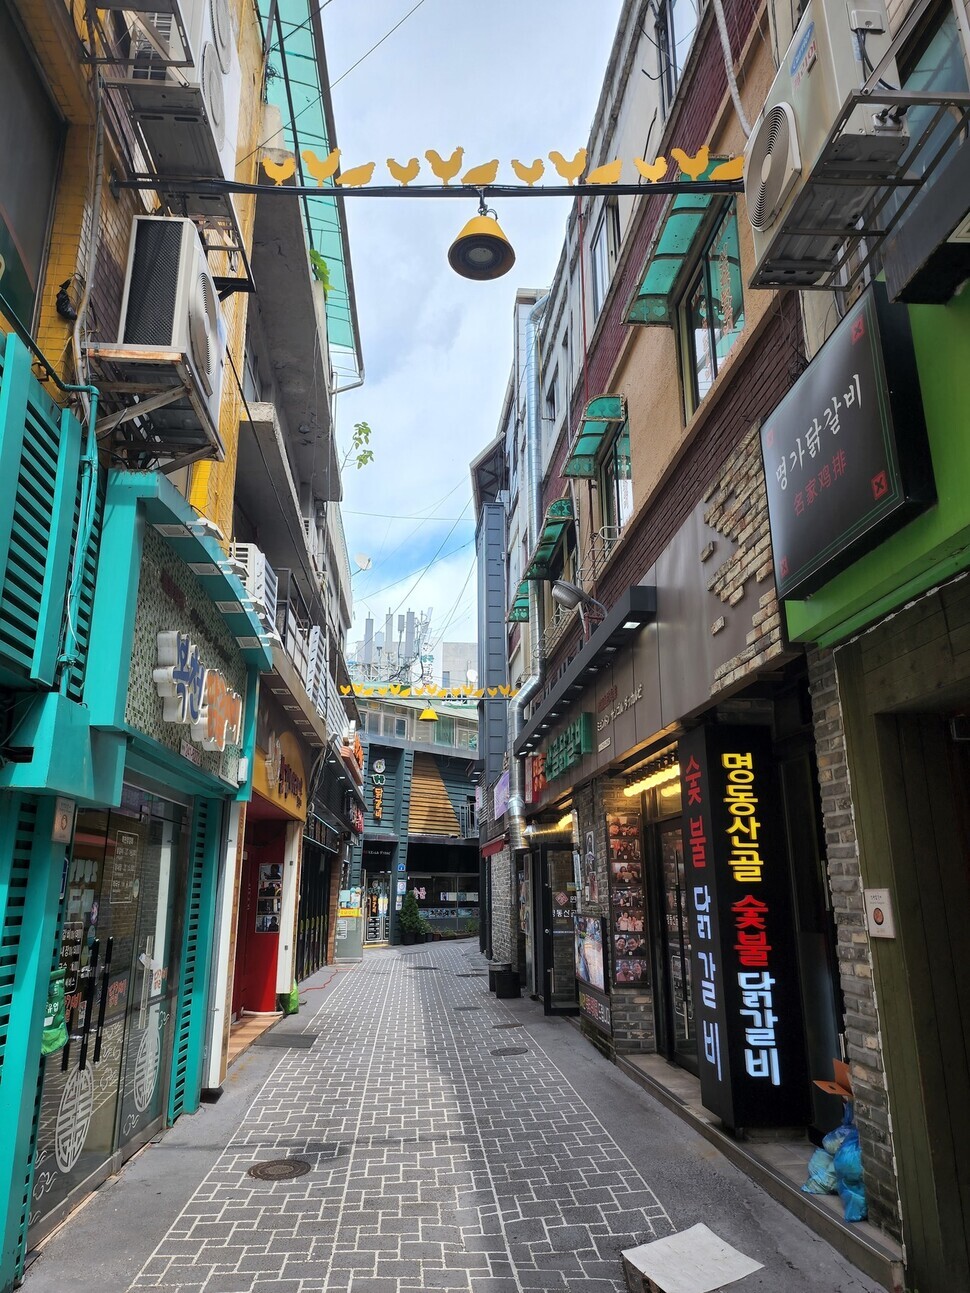 Chuncheon’s Dalkgalbi Street in the Myeong-dong neighborhood is a great place to try the city’s signature dishes.